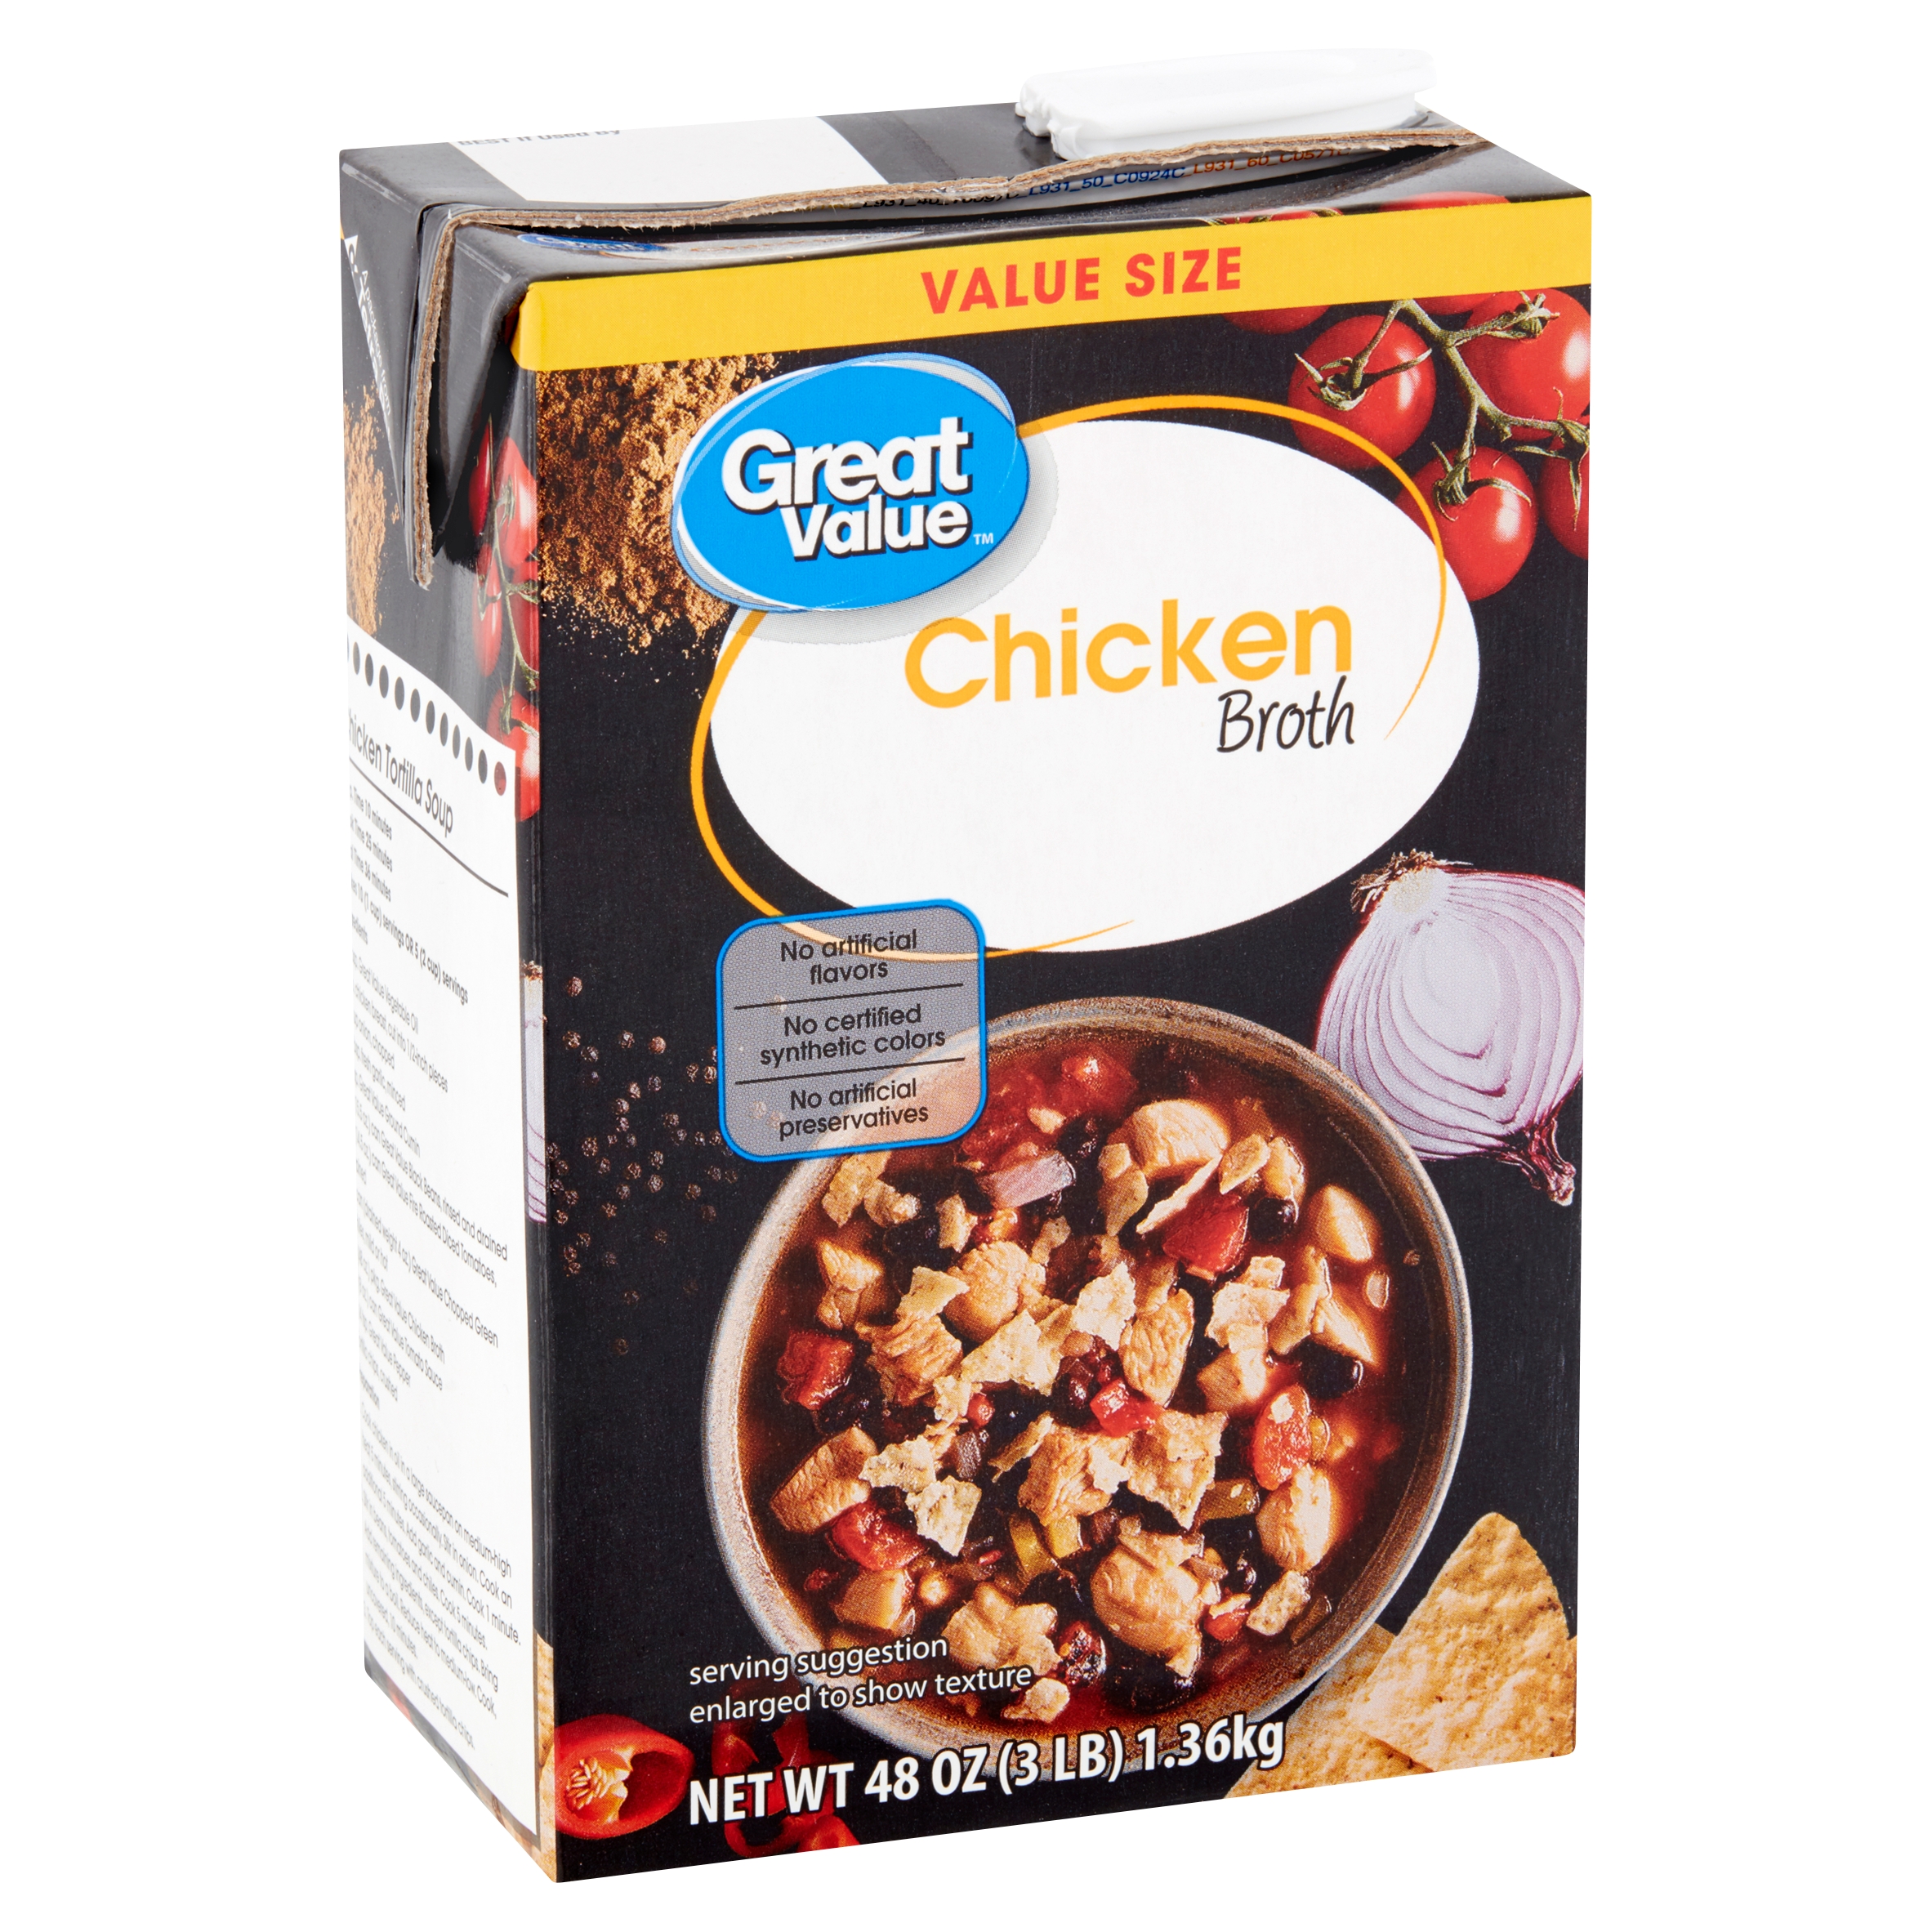 Great Value Chicken Broth Value Size, 48 Oz Image